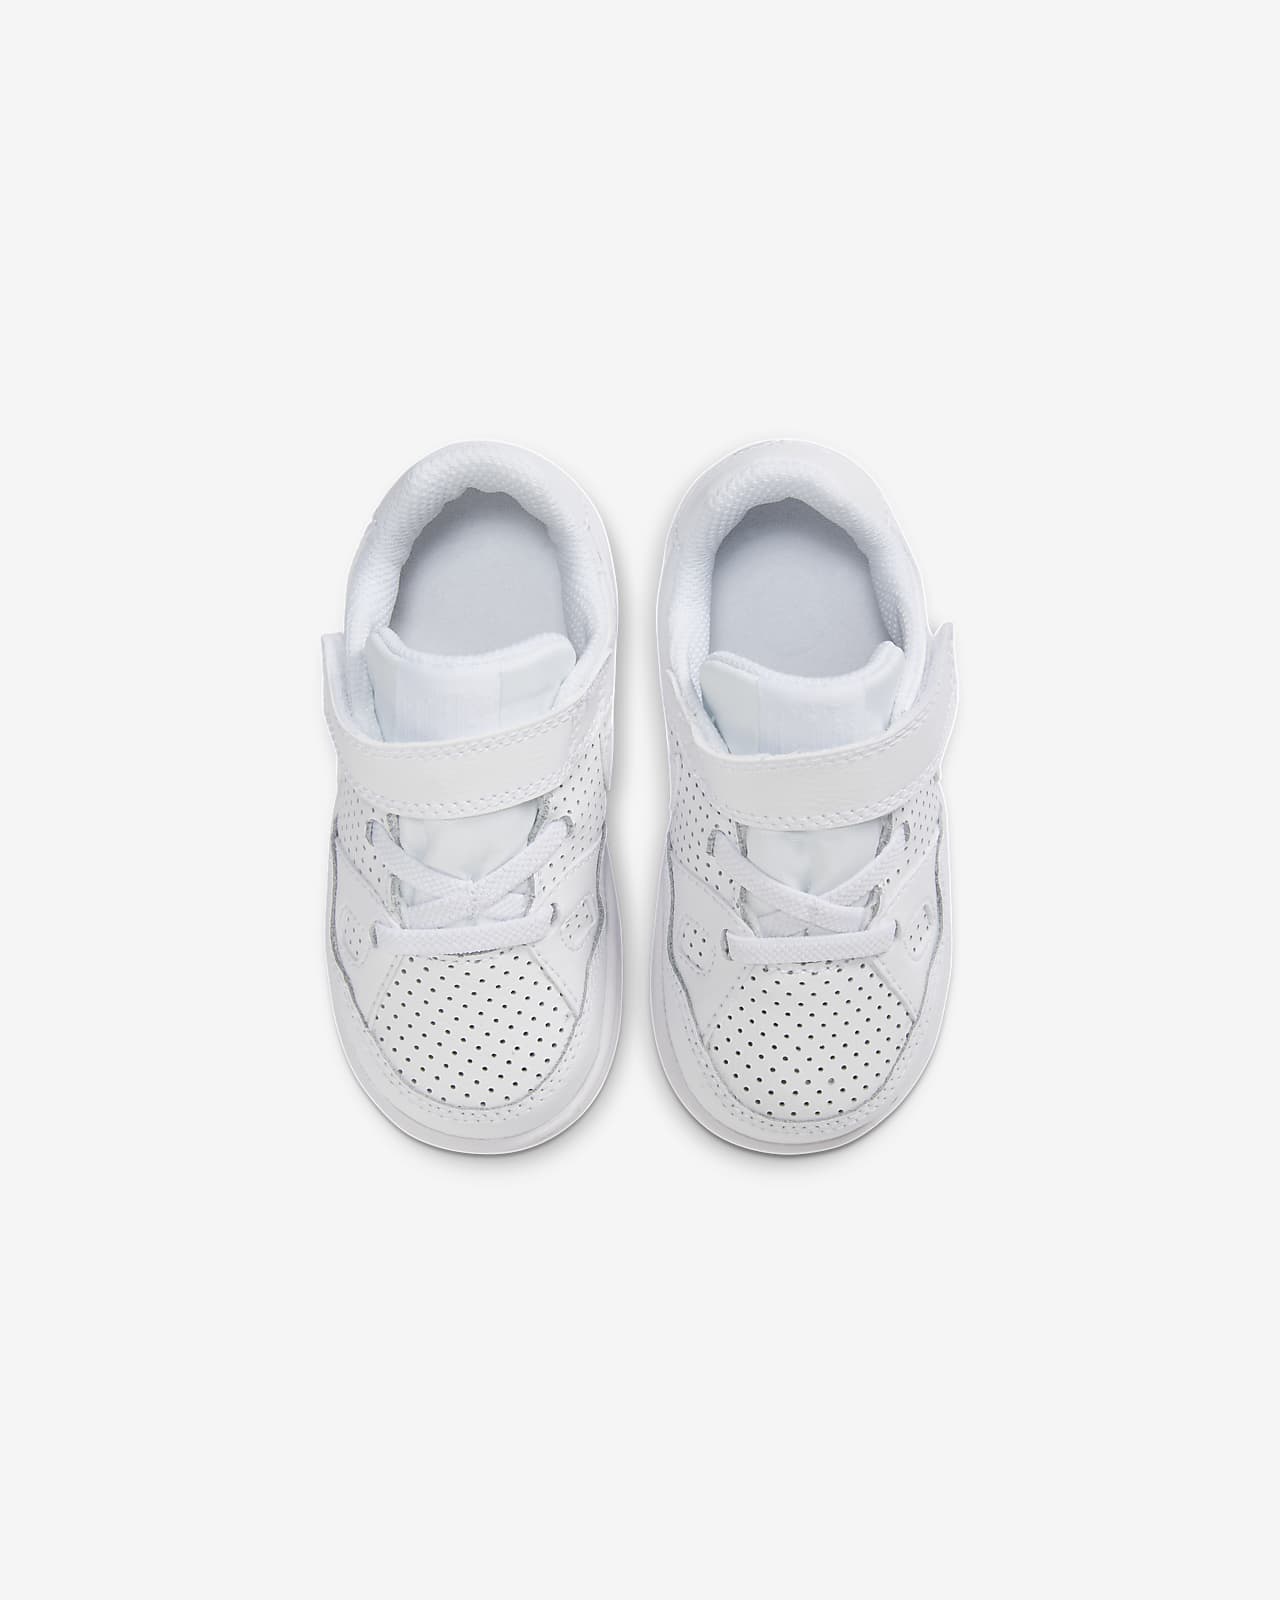 all white nike toddler shoes